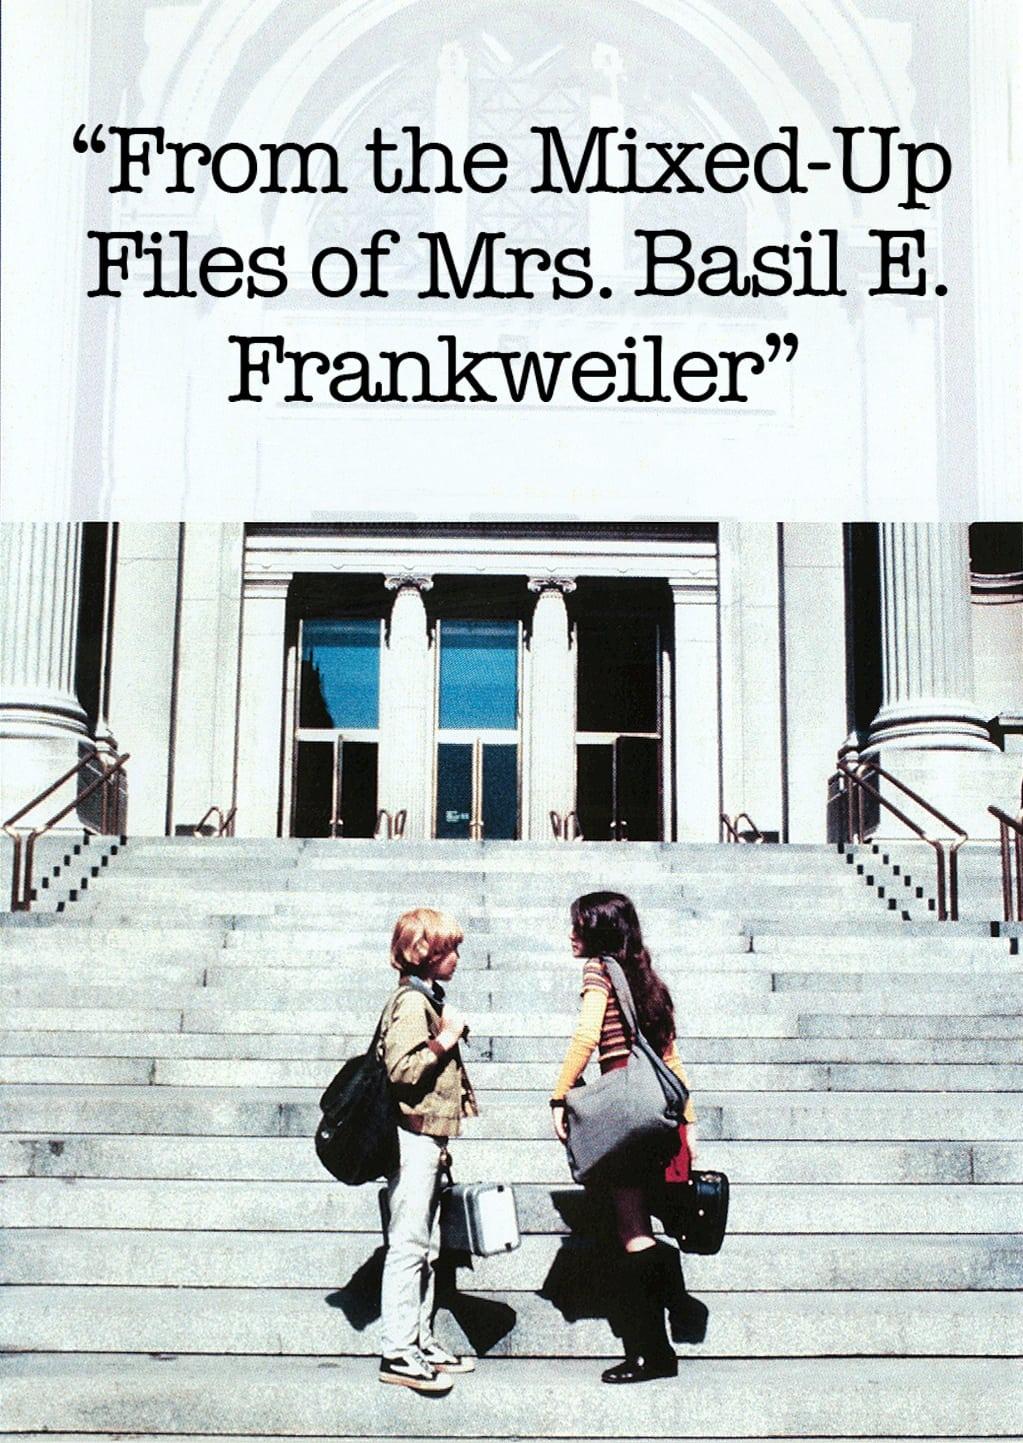 From the Mixed-Up Files of Mrs. Basil E. Frankweiler poster